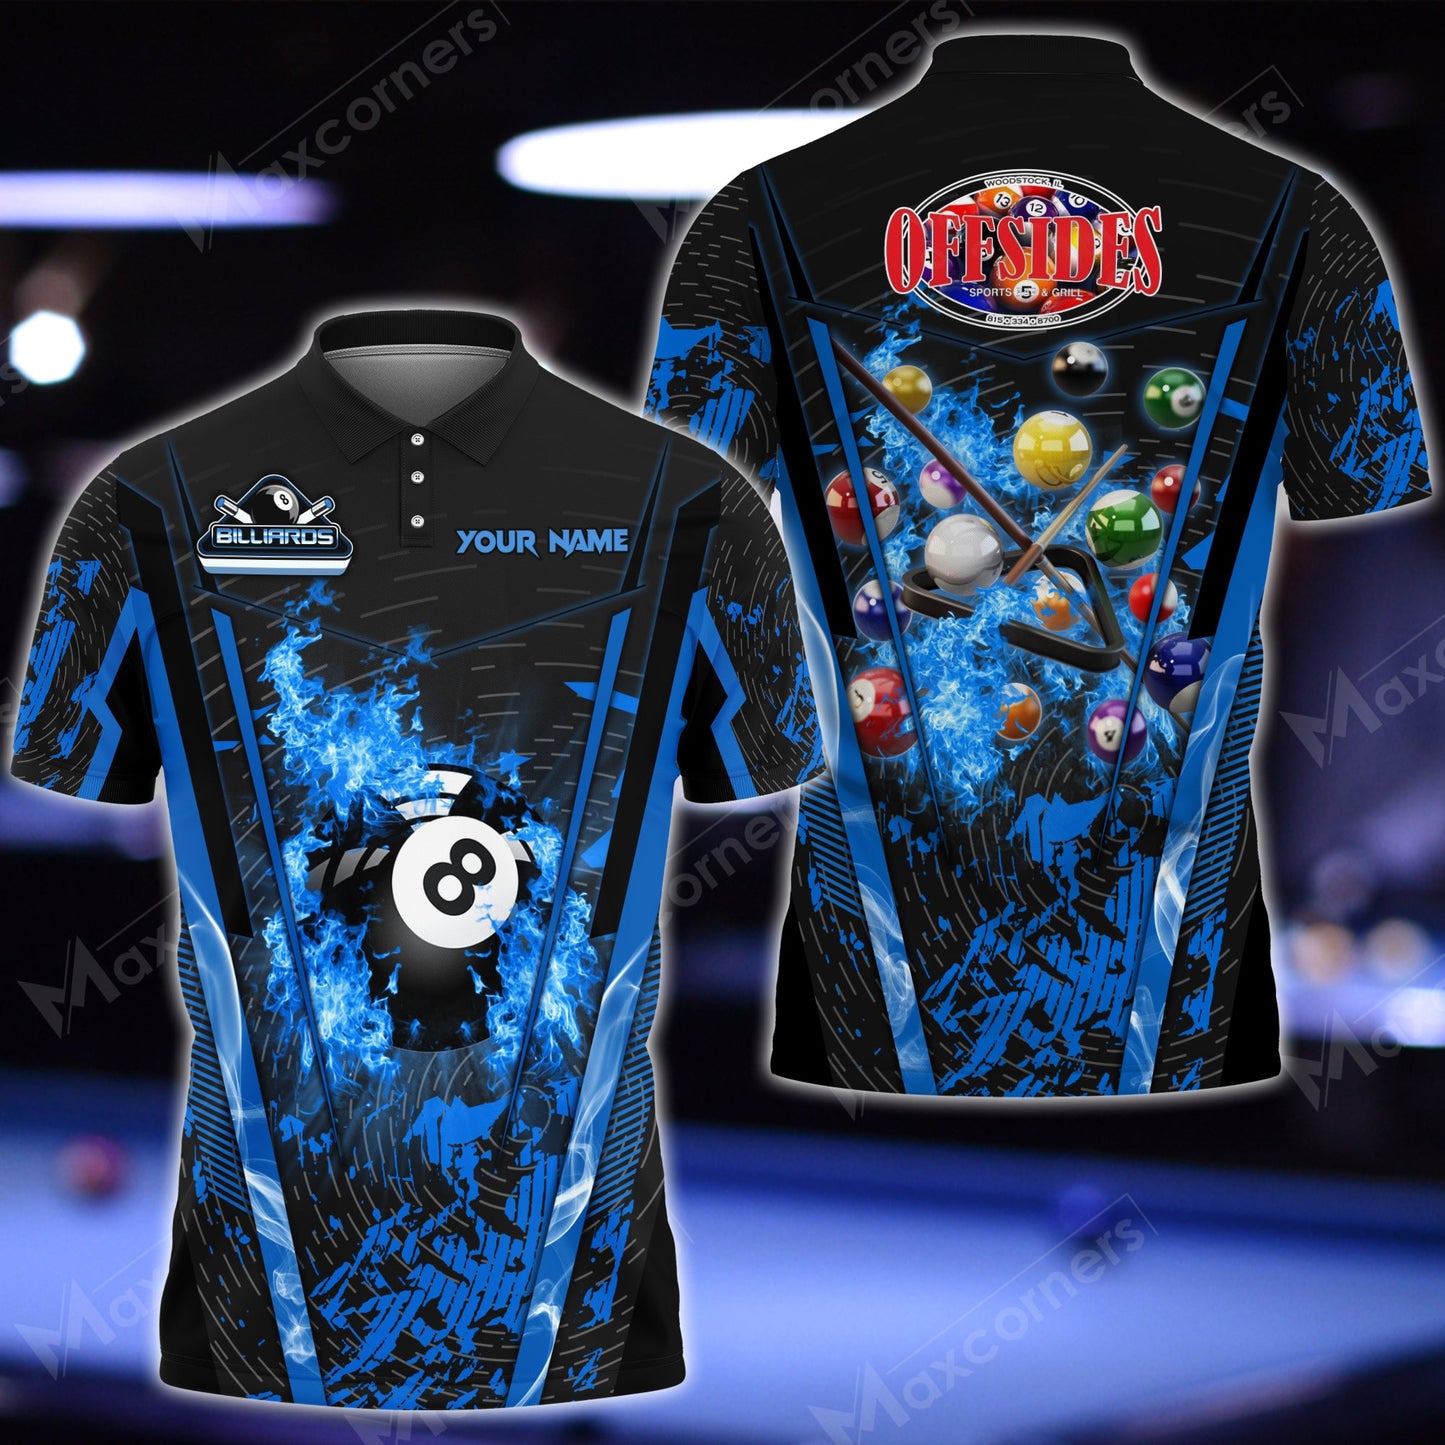 Lasfour Billiards Abstract Grunge Texture Multicolor Option Customized Name 3D Shirt For Ray Richardson BIA0389